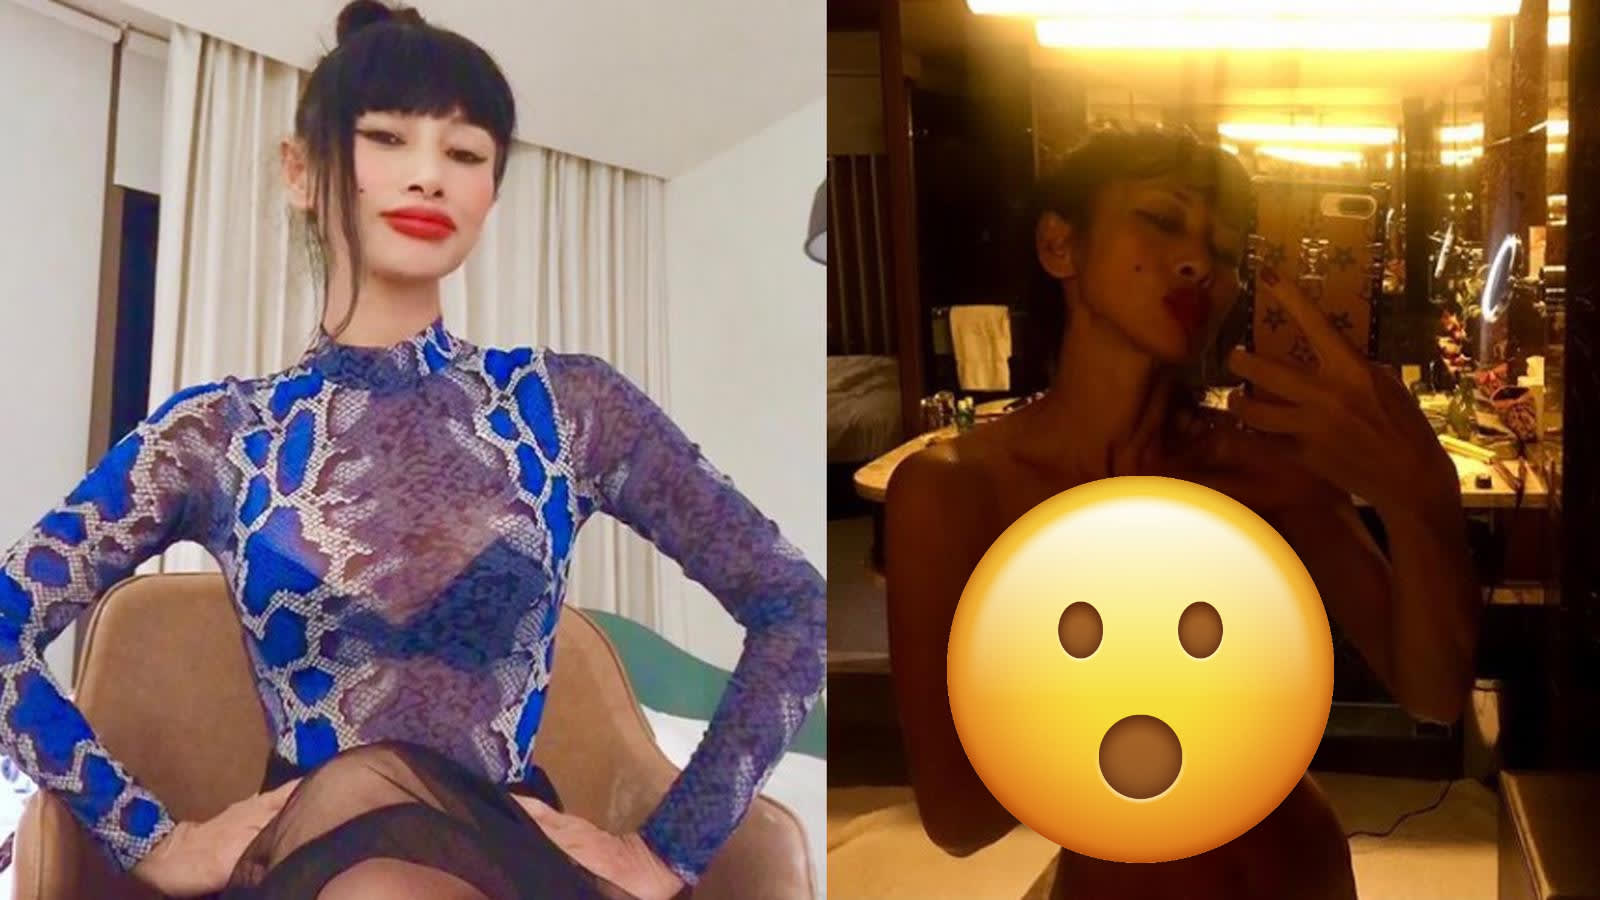 Bai Ling, 56, Looks Totally Different From When She First Started